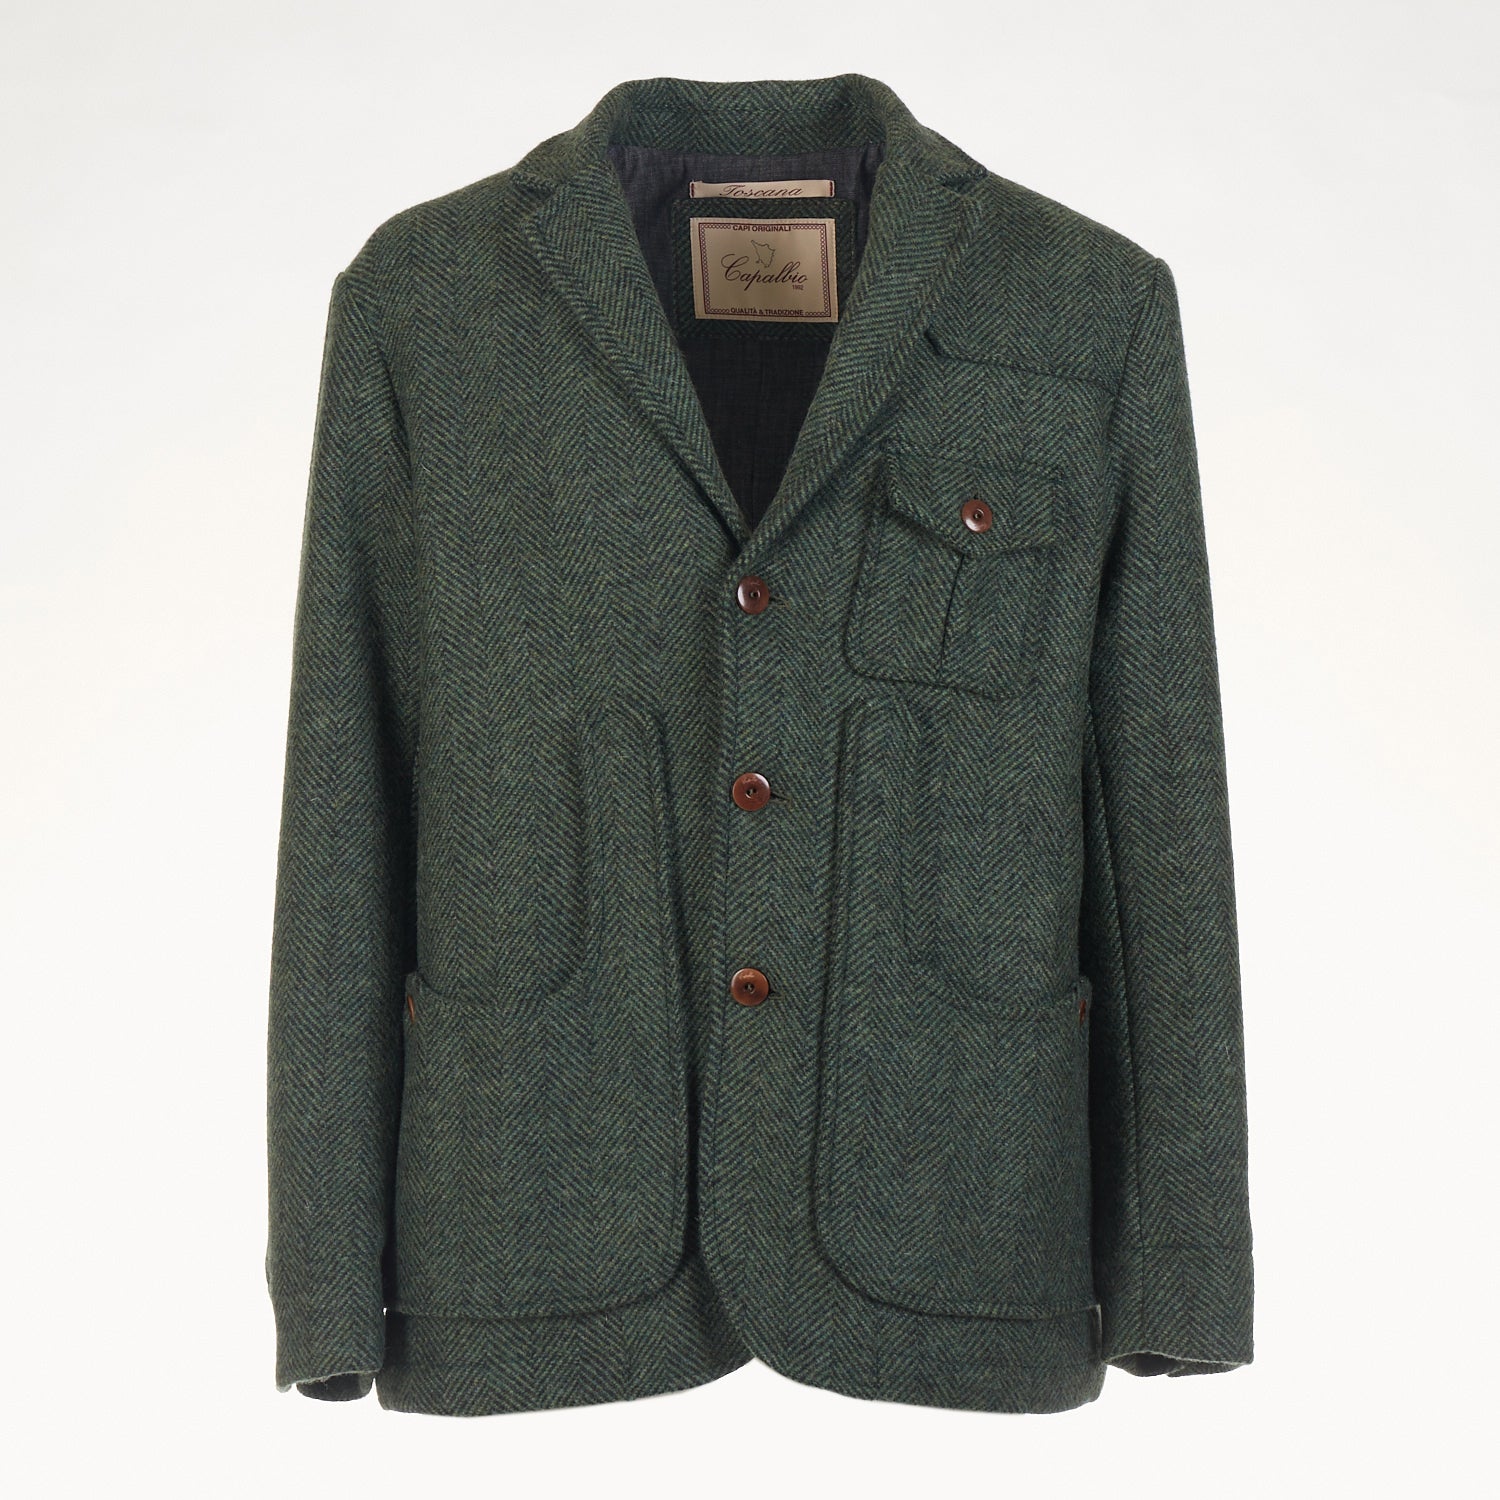 ICONIC JACKET IN RESCA WOOL